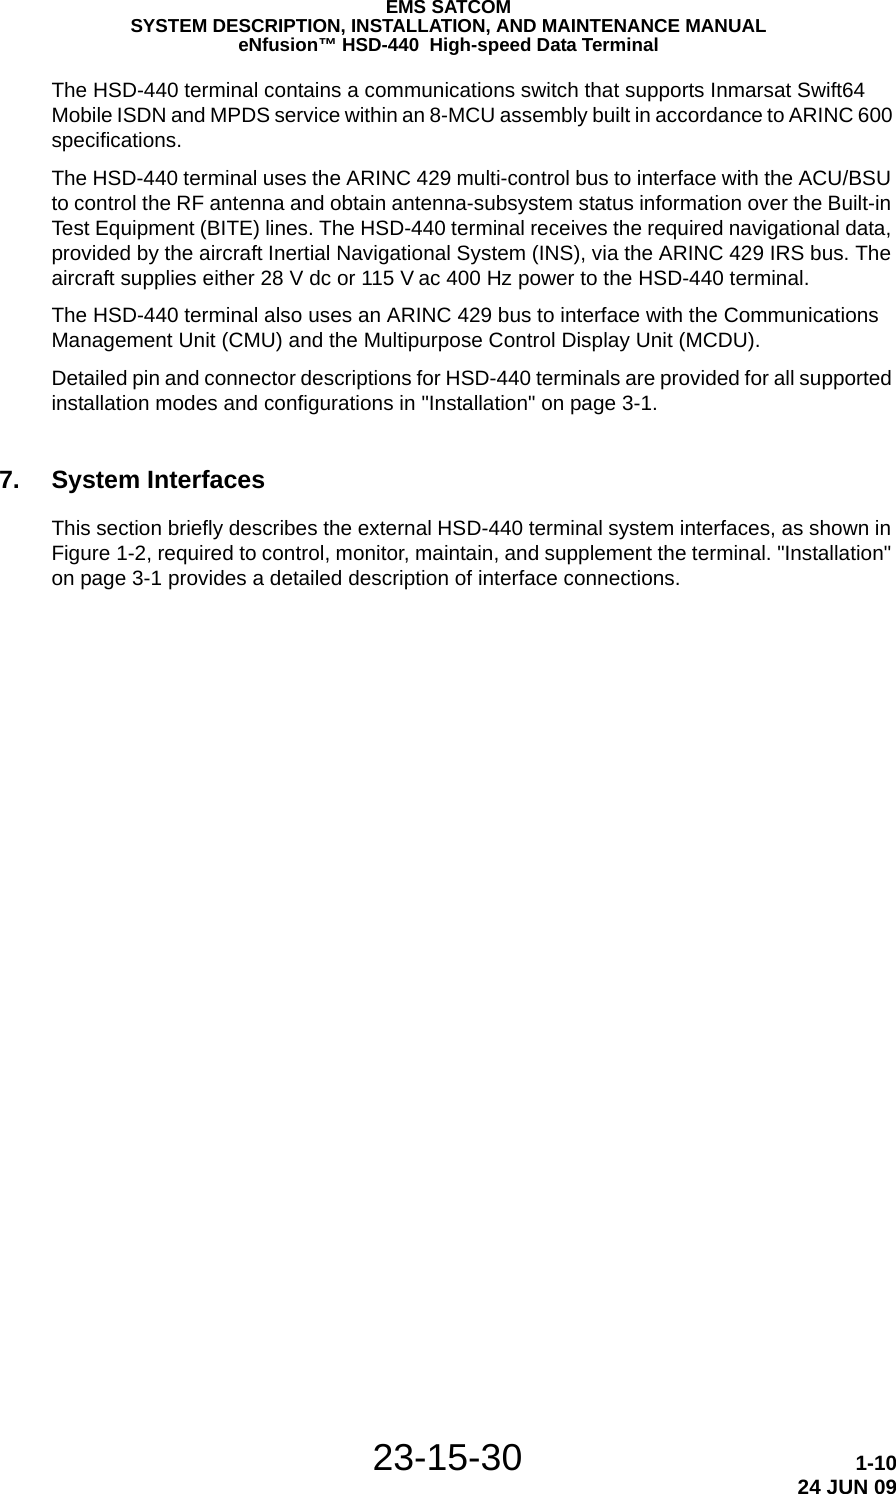 23-15-30 1-1024 JUN 09EMS SATCOMSYSTEM DESCRIPTION, INSTALLATION, AND MAINTENANCE MANUALeNfusion™ HSD-440  High-speed Data TerminalThe HSD-440 terminal contains a communications switch that supports Inmarsat Swift64 Mobile ISDN and MPDS service within an 8-MCU assembly built in accordance to ARINC 600 specifications.The HSD-440 terminal uses the ARINC 429 multi-control bus to interface with the ACU/BSU to control the RF antenna and obtain antenna-subsystem status information over the Built-in Test Equipment (BITE) lines. The HSD-440 terminal receives the required navigational data, provided by the aircraft Inertial Navigational System (INS), via the ARINC 429 IRS bus. The aircraft supplies either 28 V dc or 115 V ac 400 Hz power to the HSD-440 terminal.The HSD-440 terminal also uses an ARINC 429 bus to interface with the Communications Management Unit (CMU) and the Multipurpose Control Display Unit (MCDU).Detailed pin and connector descriptions for HSD-440 terminals are provided for all supported installation modes and configurations in &quot;Installation&quot; on page 3-1.7. System InterfacesThis section briefly describes the external HSD-440 terminal system interfaces, as shown in Figure 1-2, required to control, monitor, maintain, and supplement the terminal. &quot;Installation&quot; on page 3-1 provides a detailed description of interface connections.